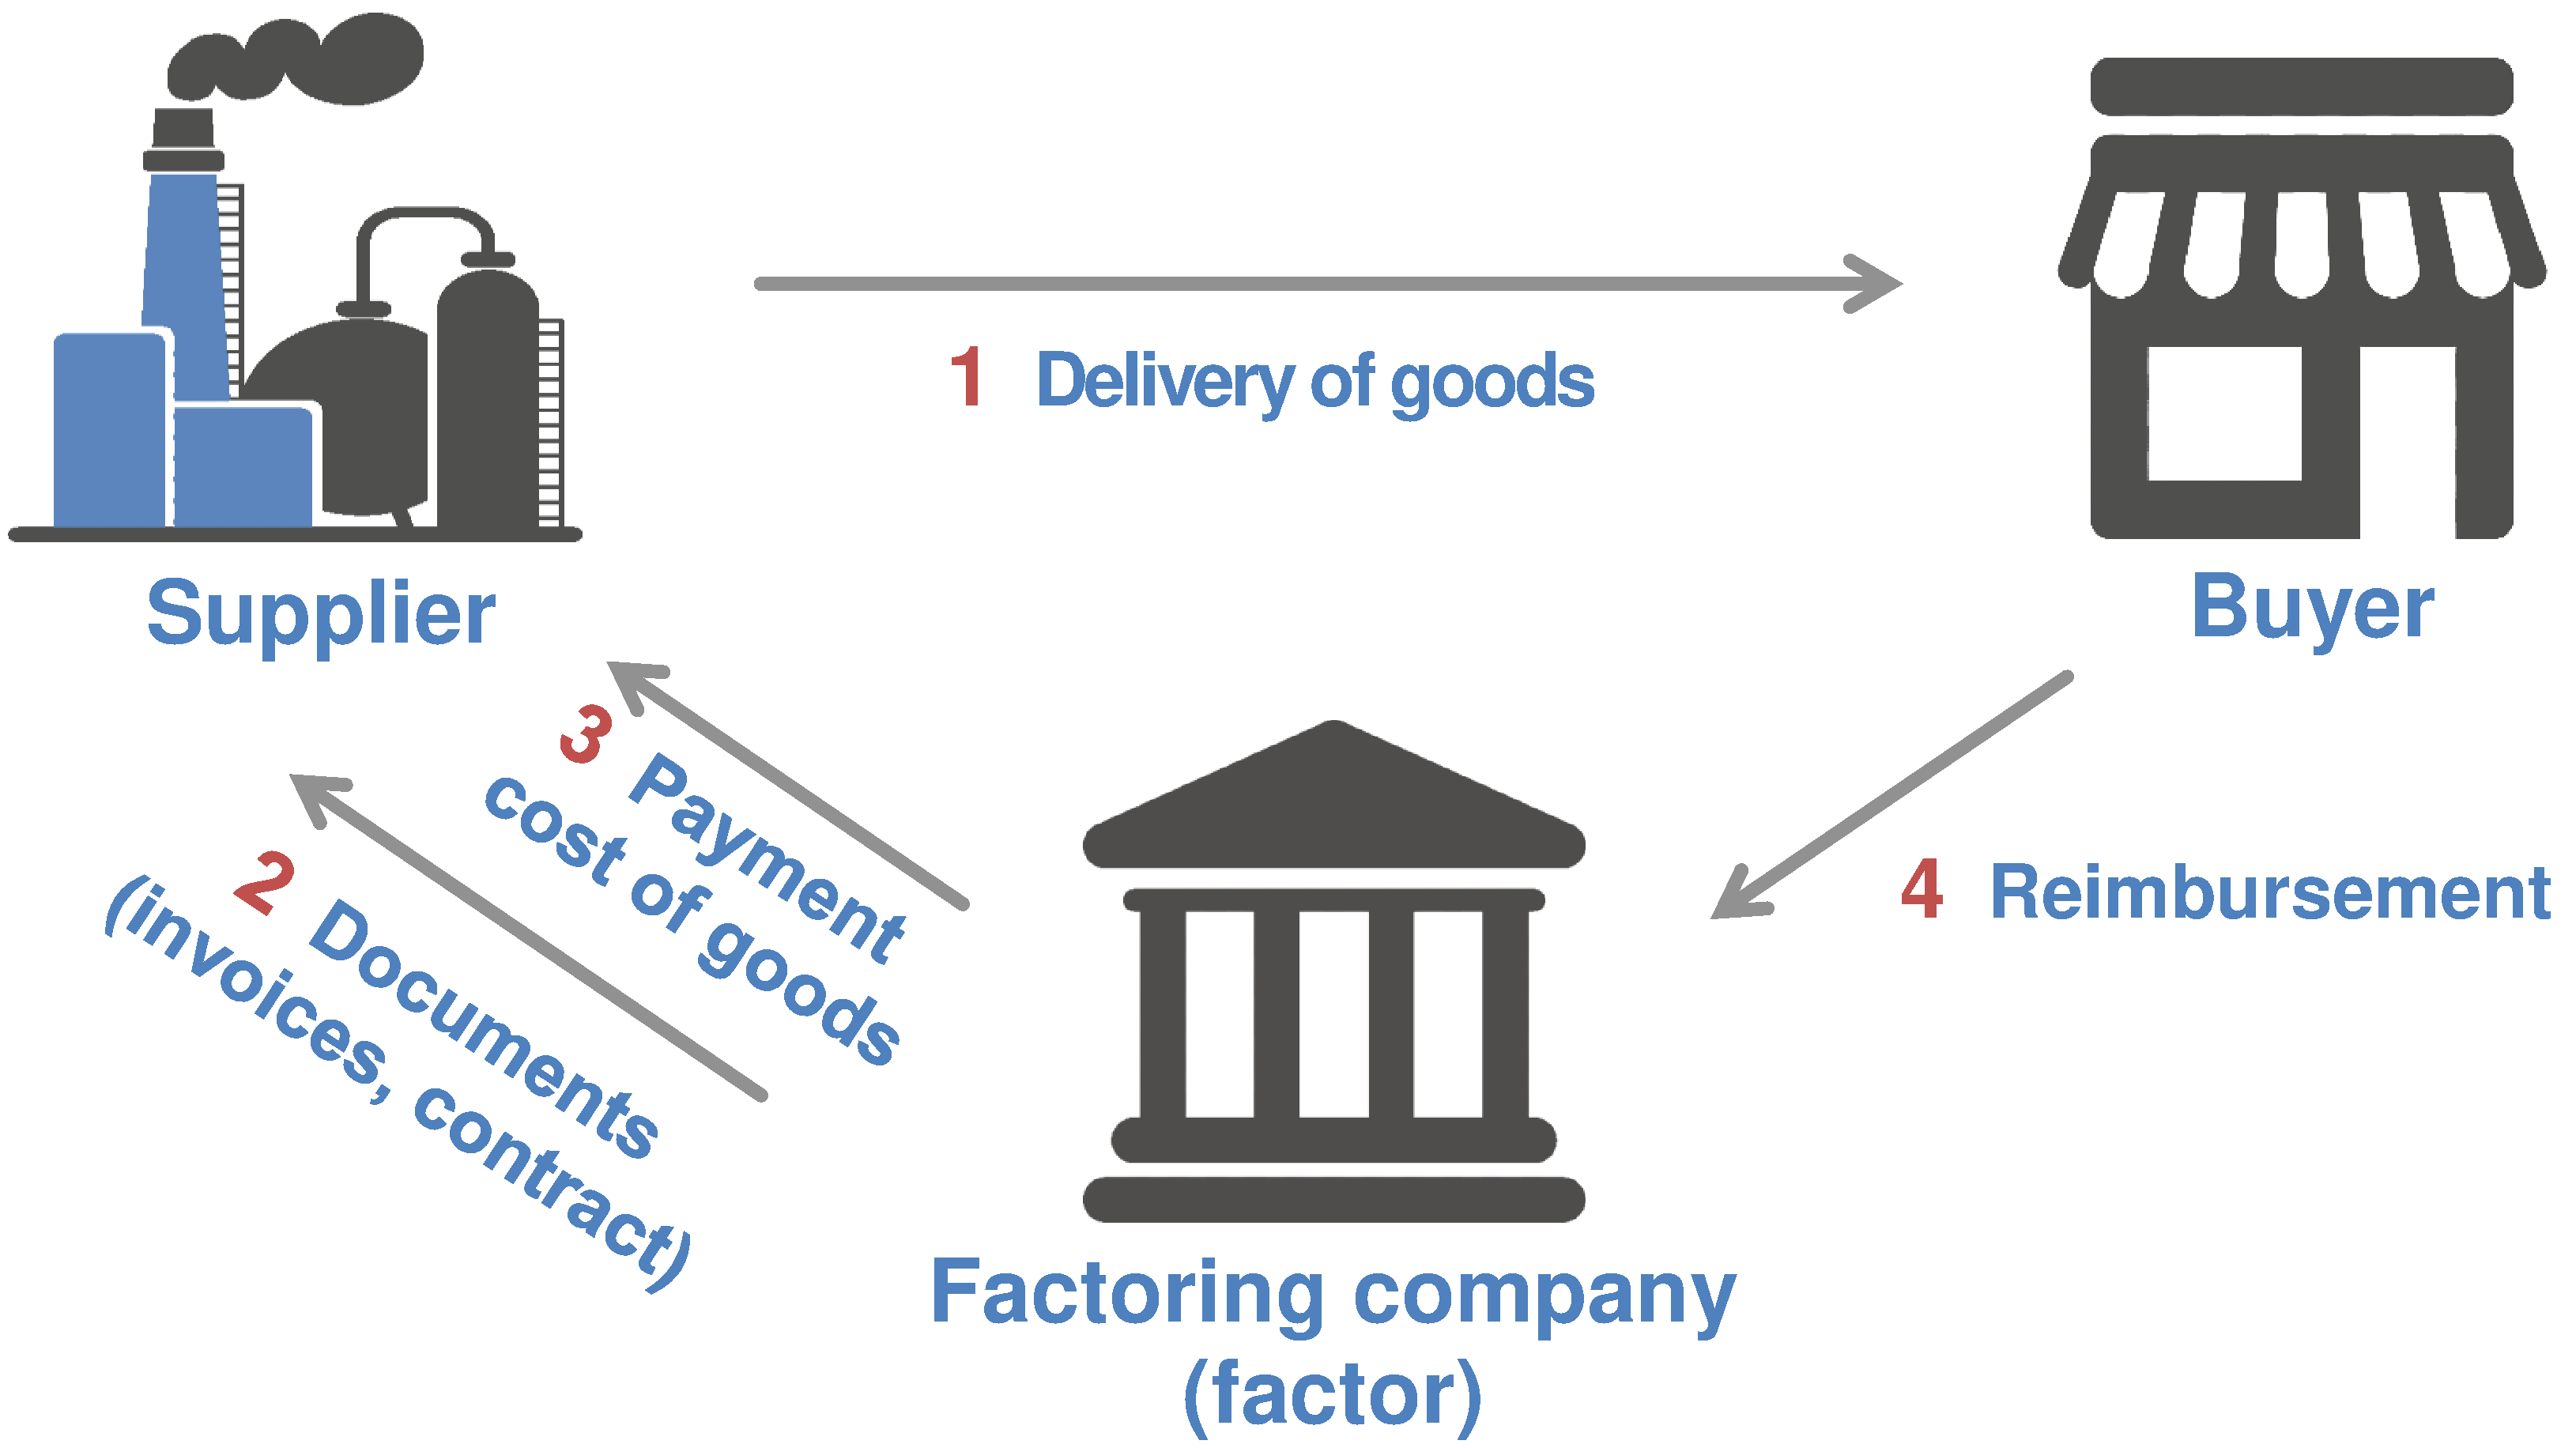 Factoring schemes are often used in transactions for the supply of goods and services from small firms to large corporations, chain stores